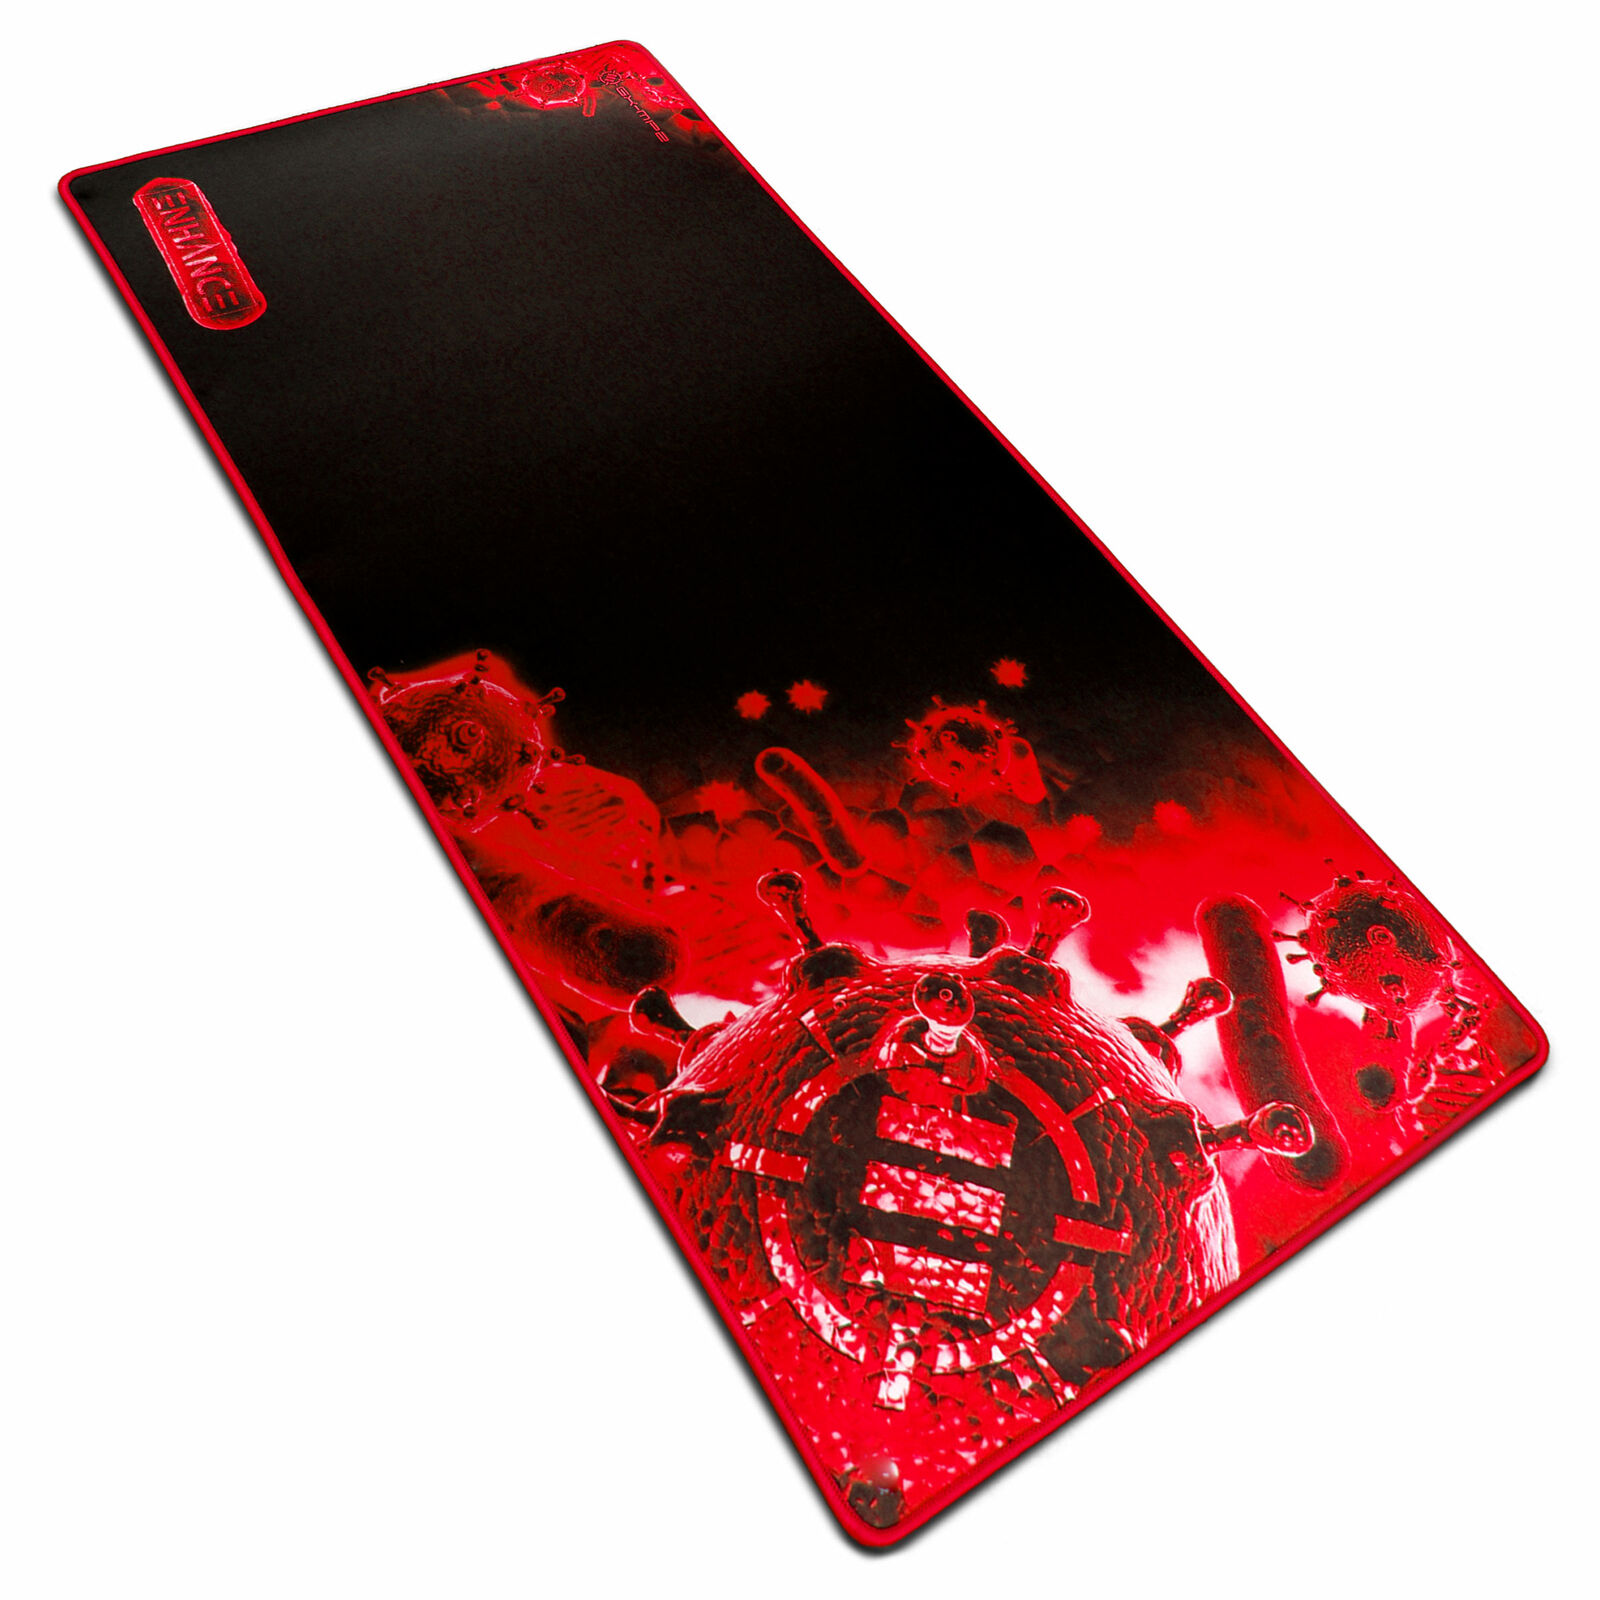 XXL Extended Gaming Mouse Mat / Pad ( 31.5 x 13.75 Inches )